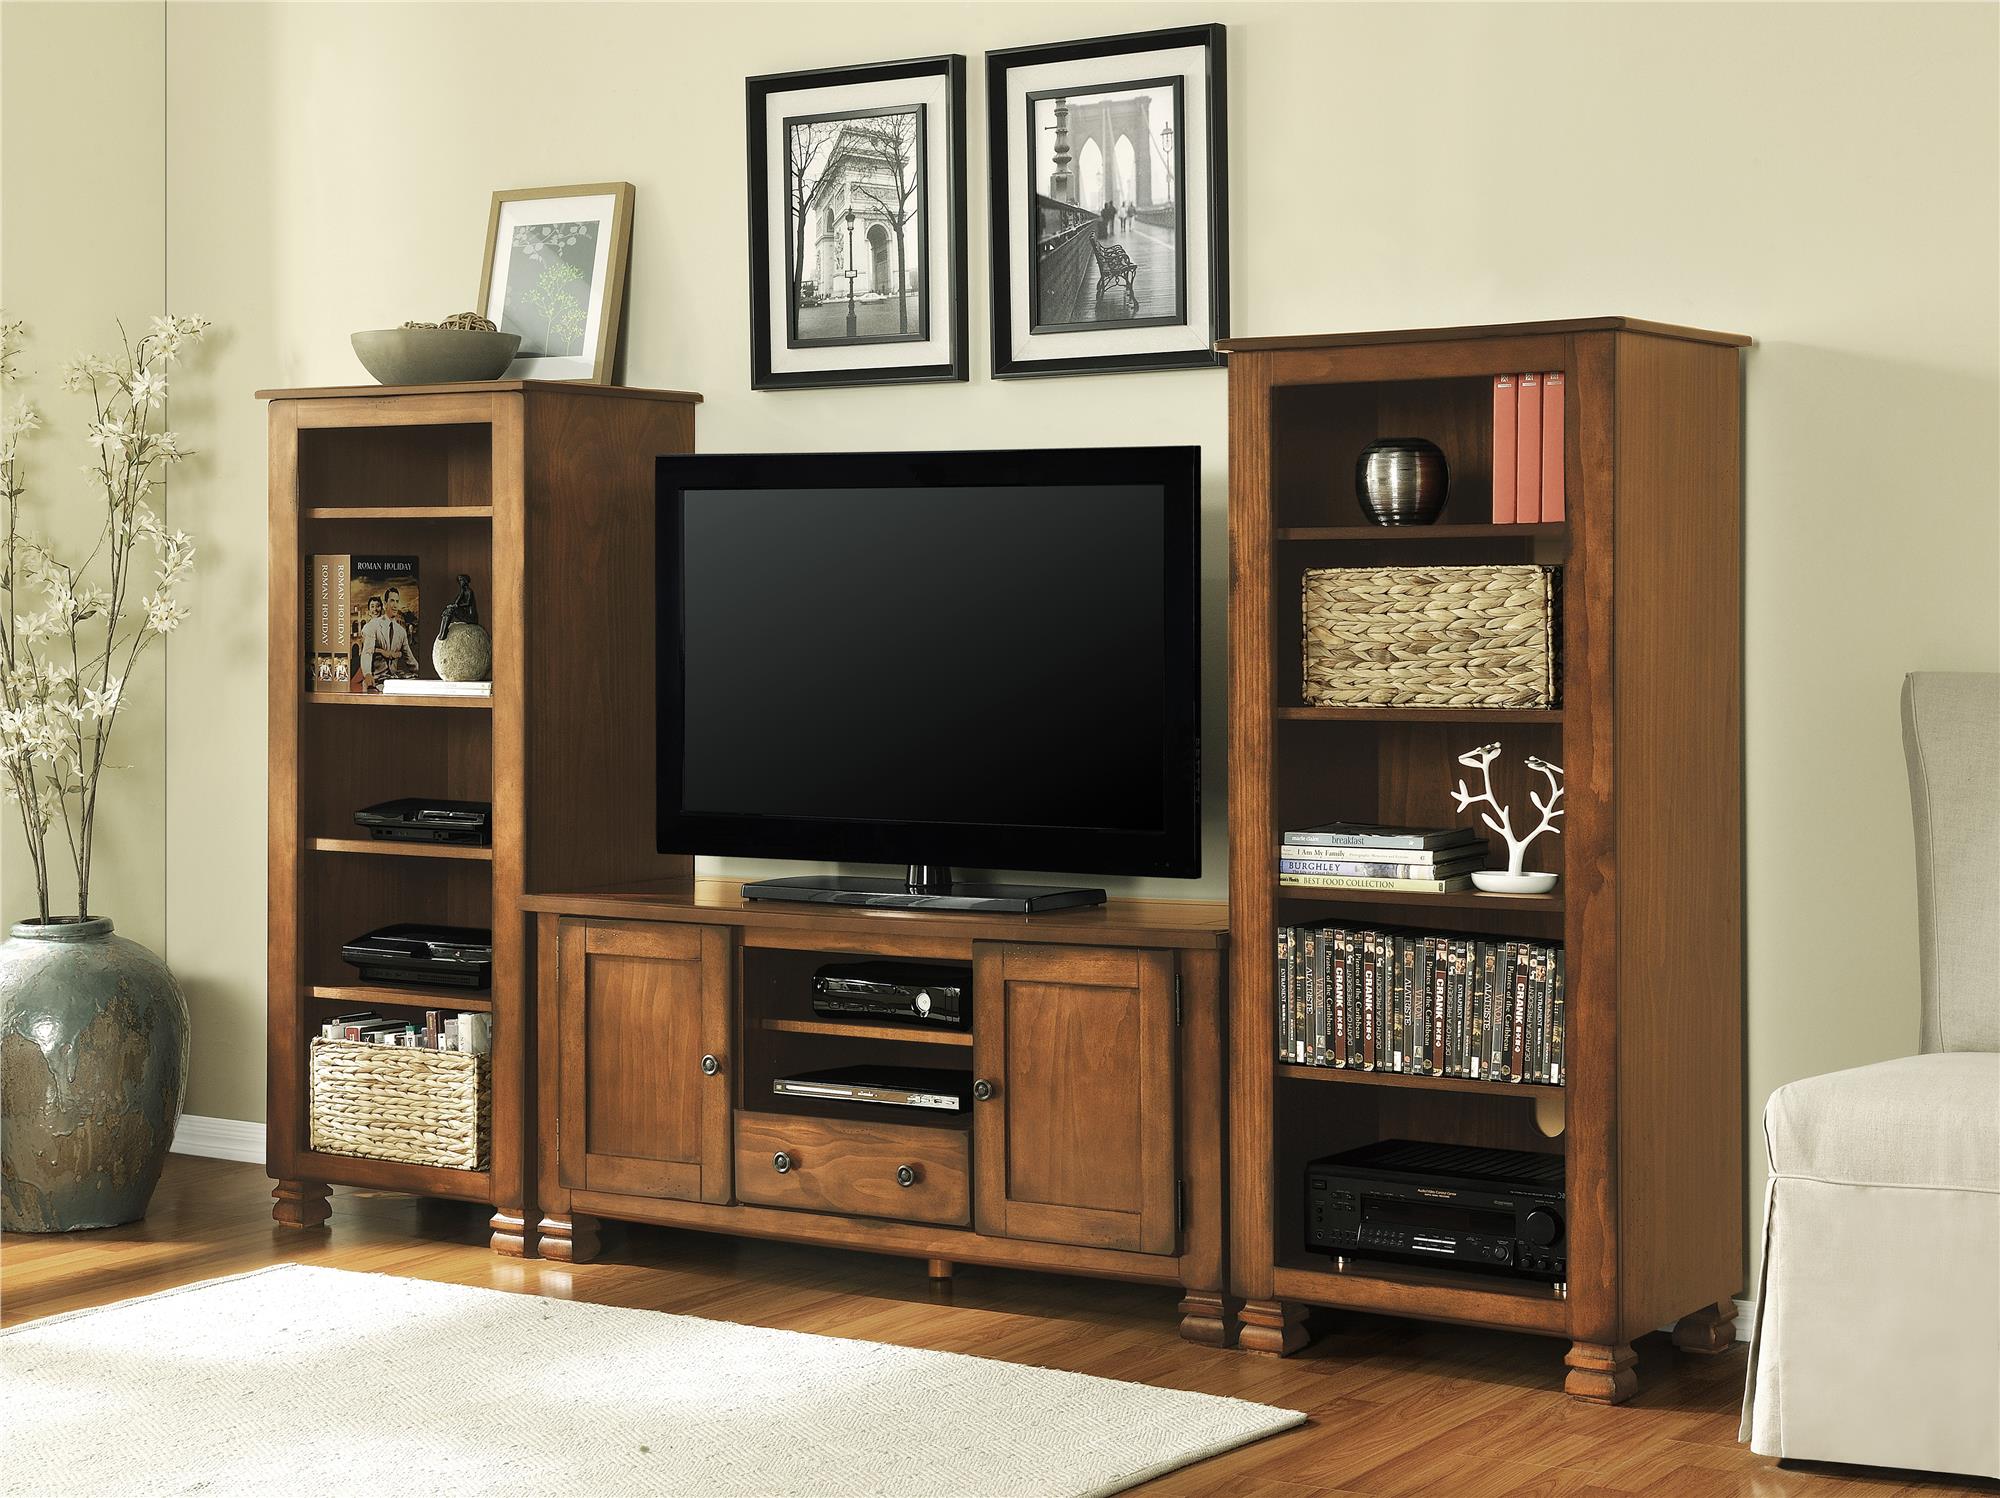 Ameriwood Home Summit Mountain Wood Veneer TV Stand for TVs up to 55" Wide, Medium Brown - image 3 of 9